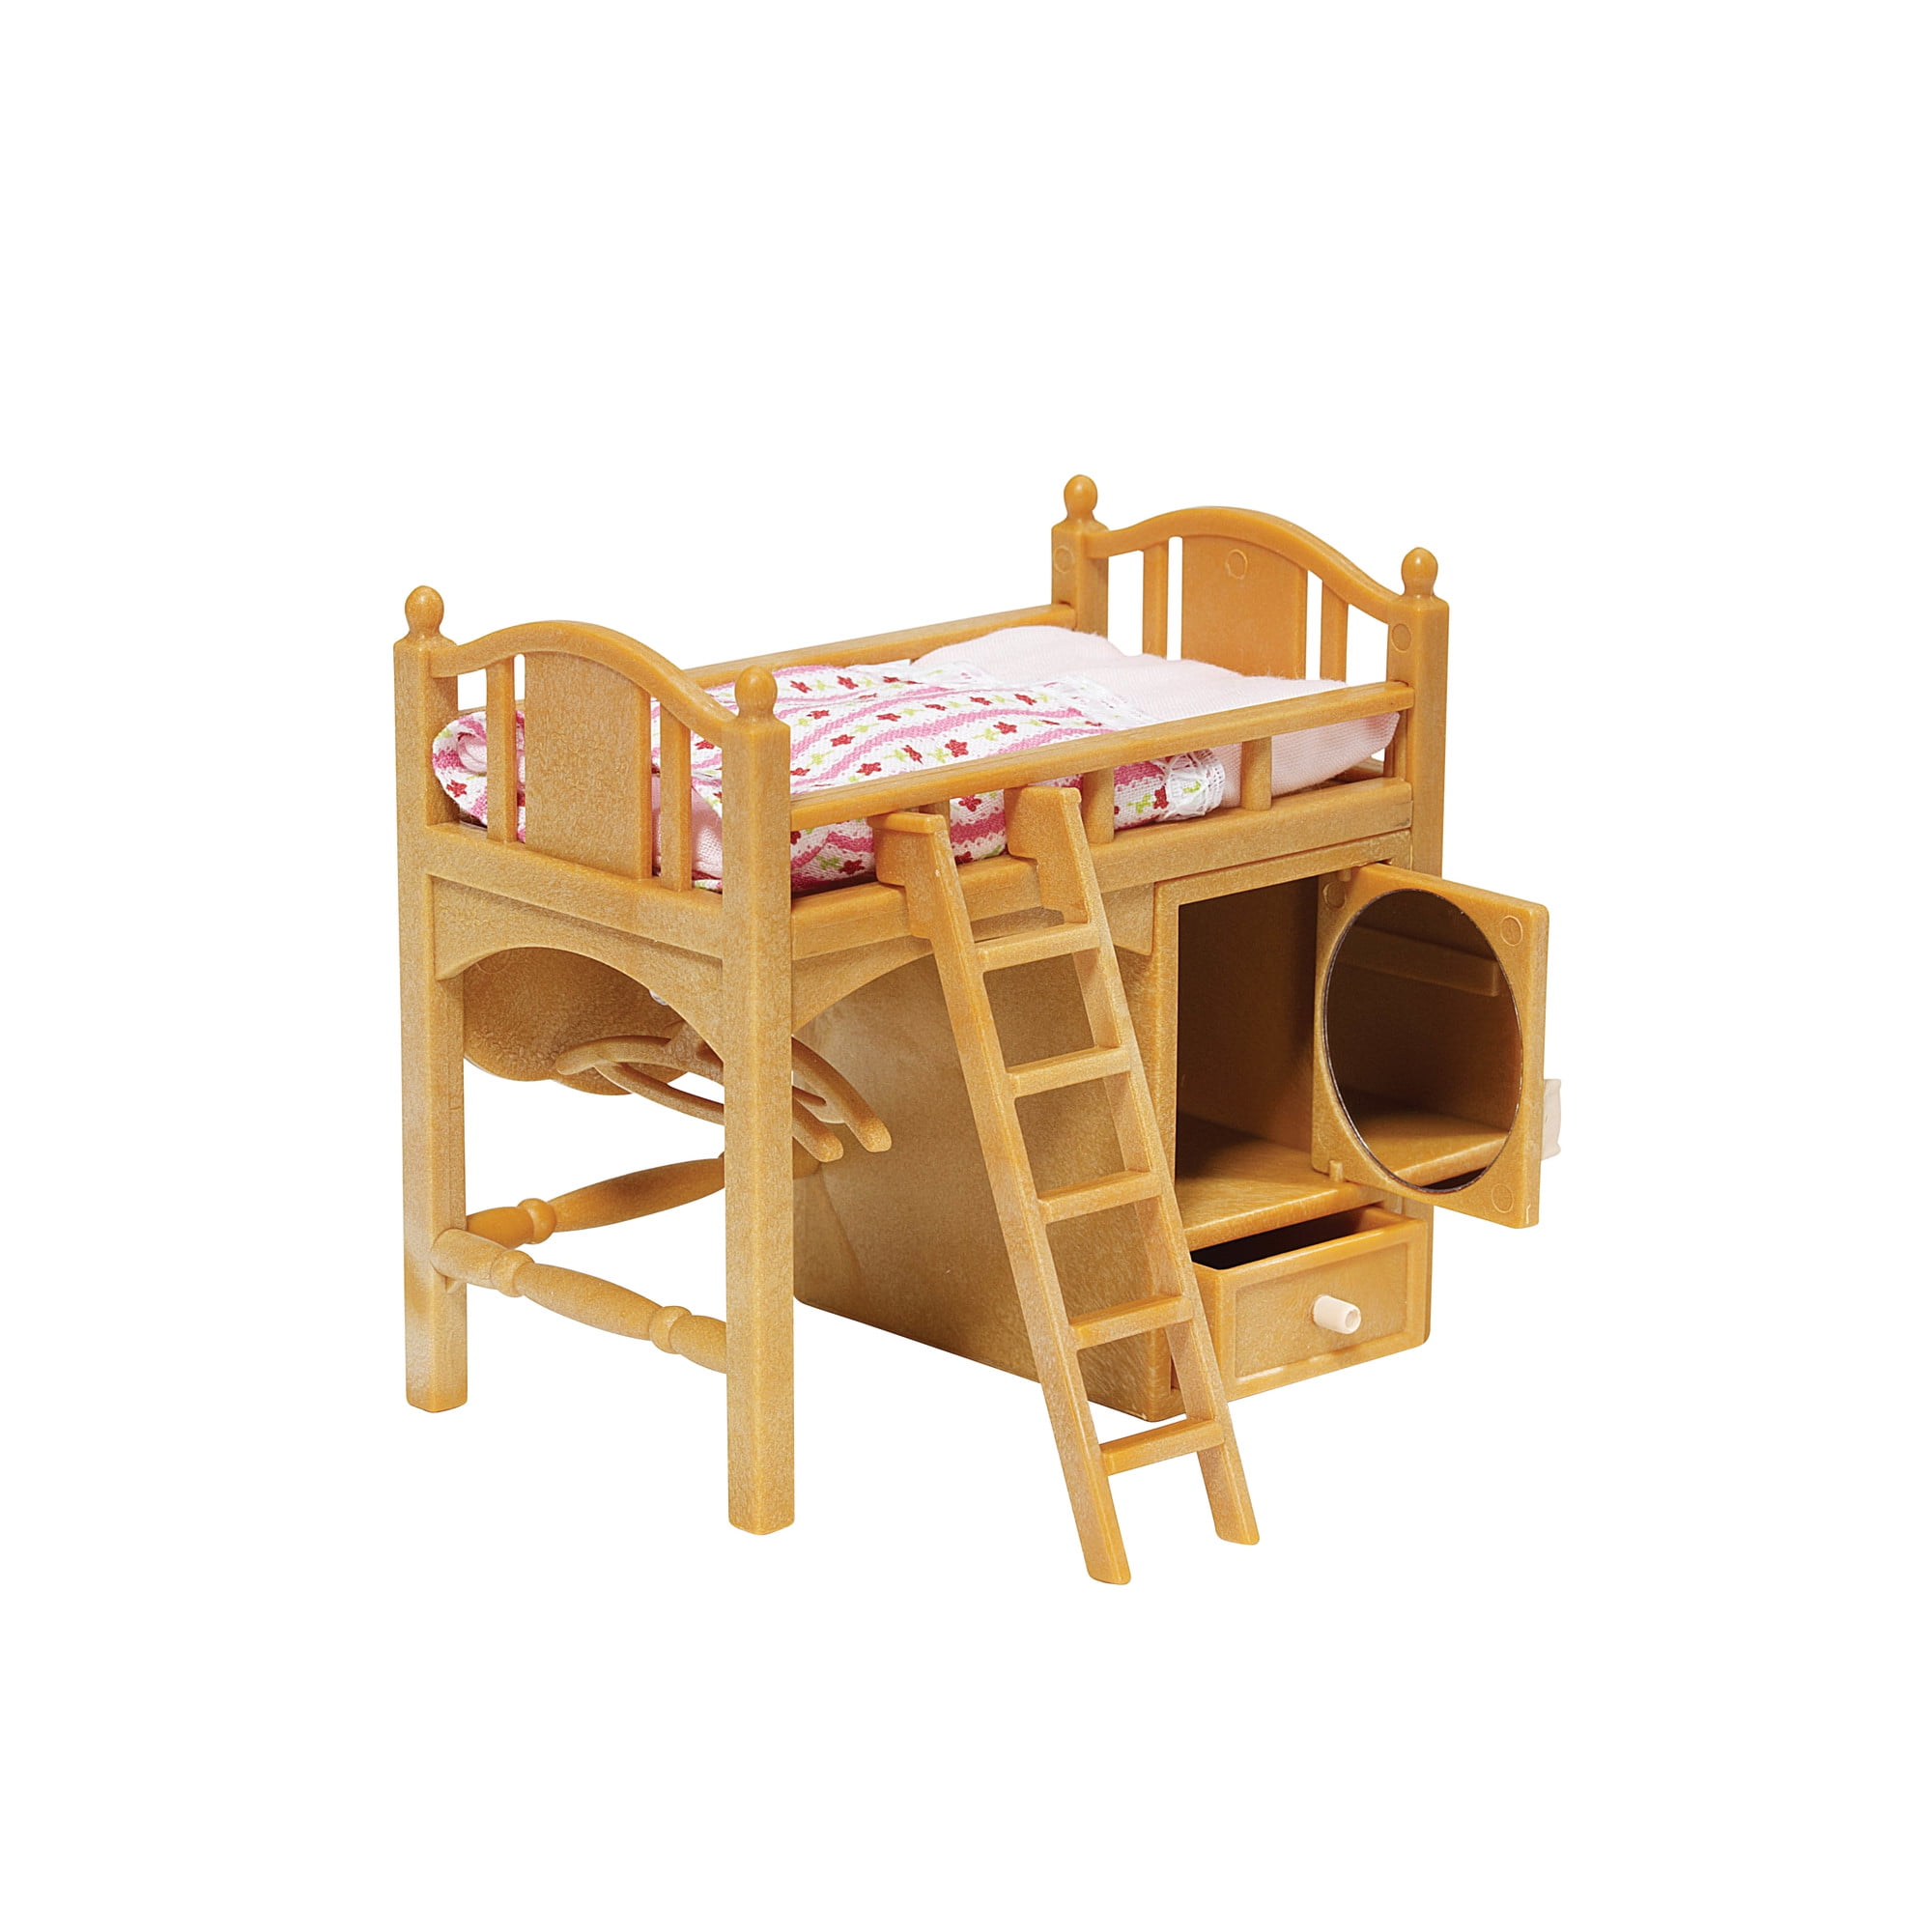 Sylvanian Families Furniture Baby Bed KA 213 Calico Critters 4905040262400 for sale online 